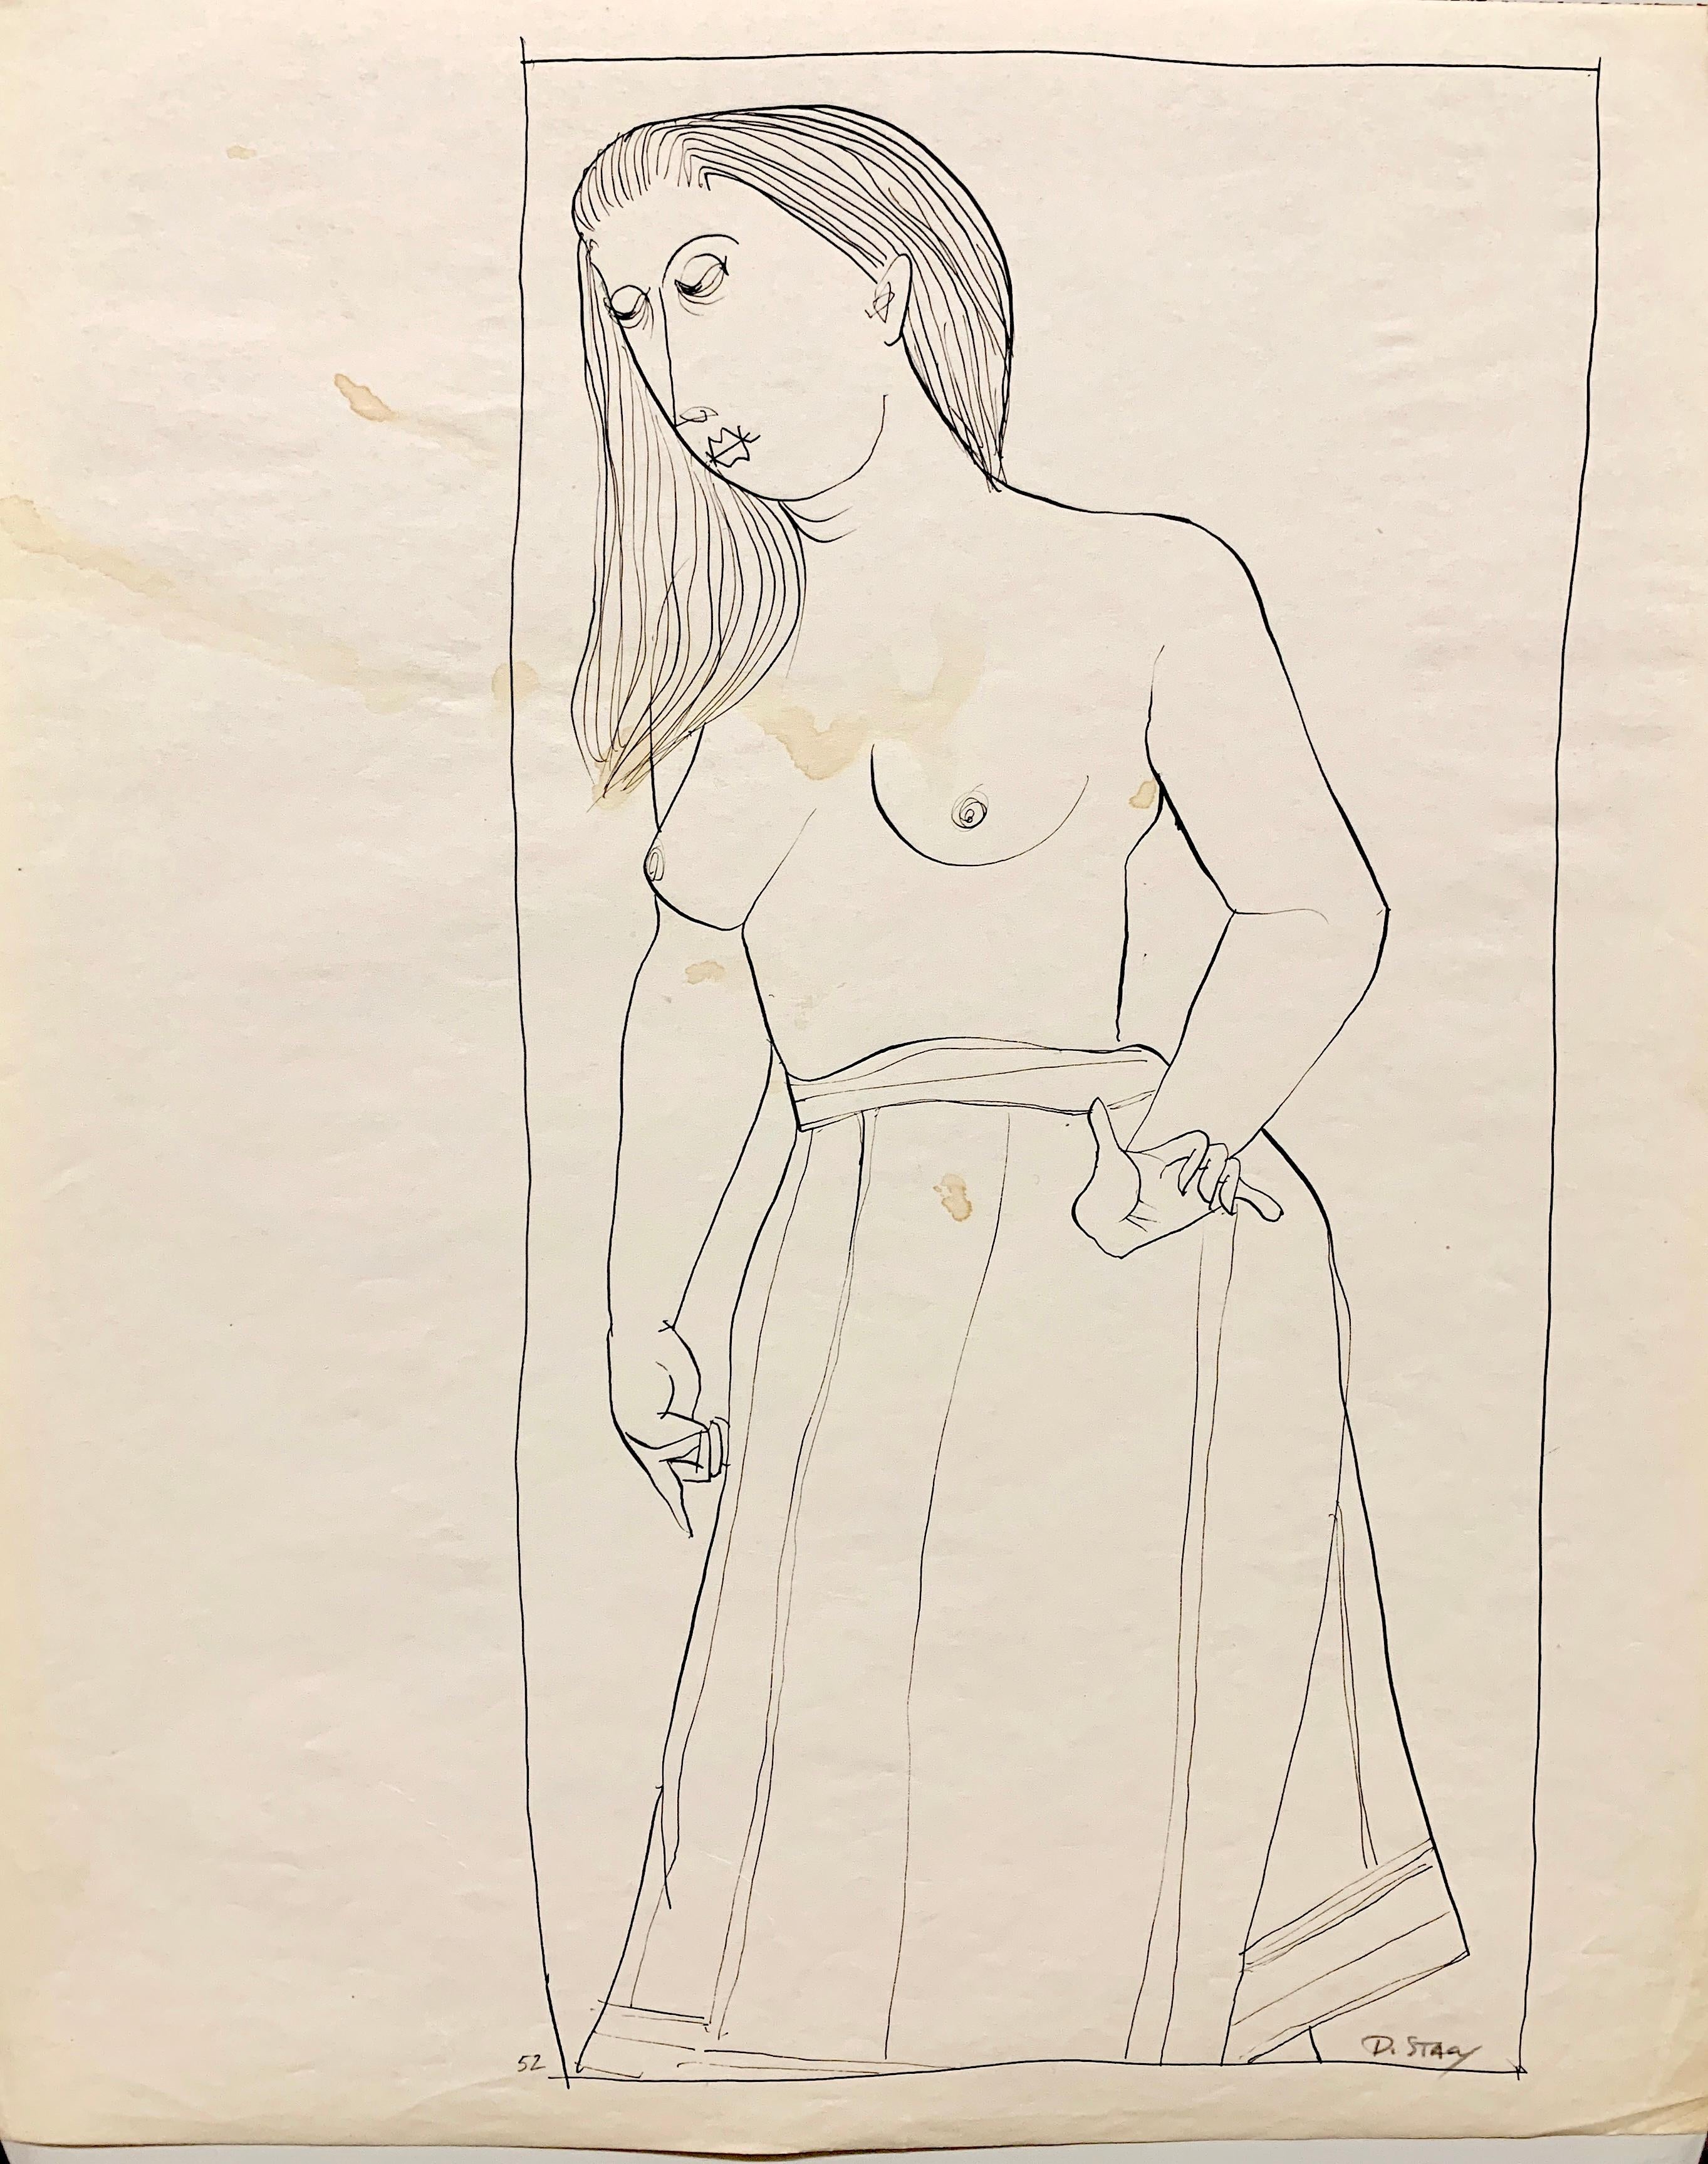 Donald Stacy Figurative Art - 1950s "Topless" Mid Century Figurative Ink Line Drawing 